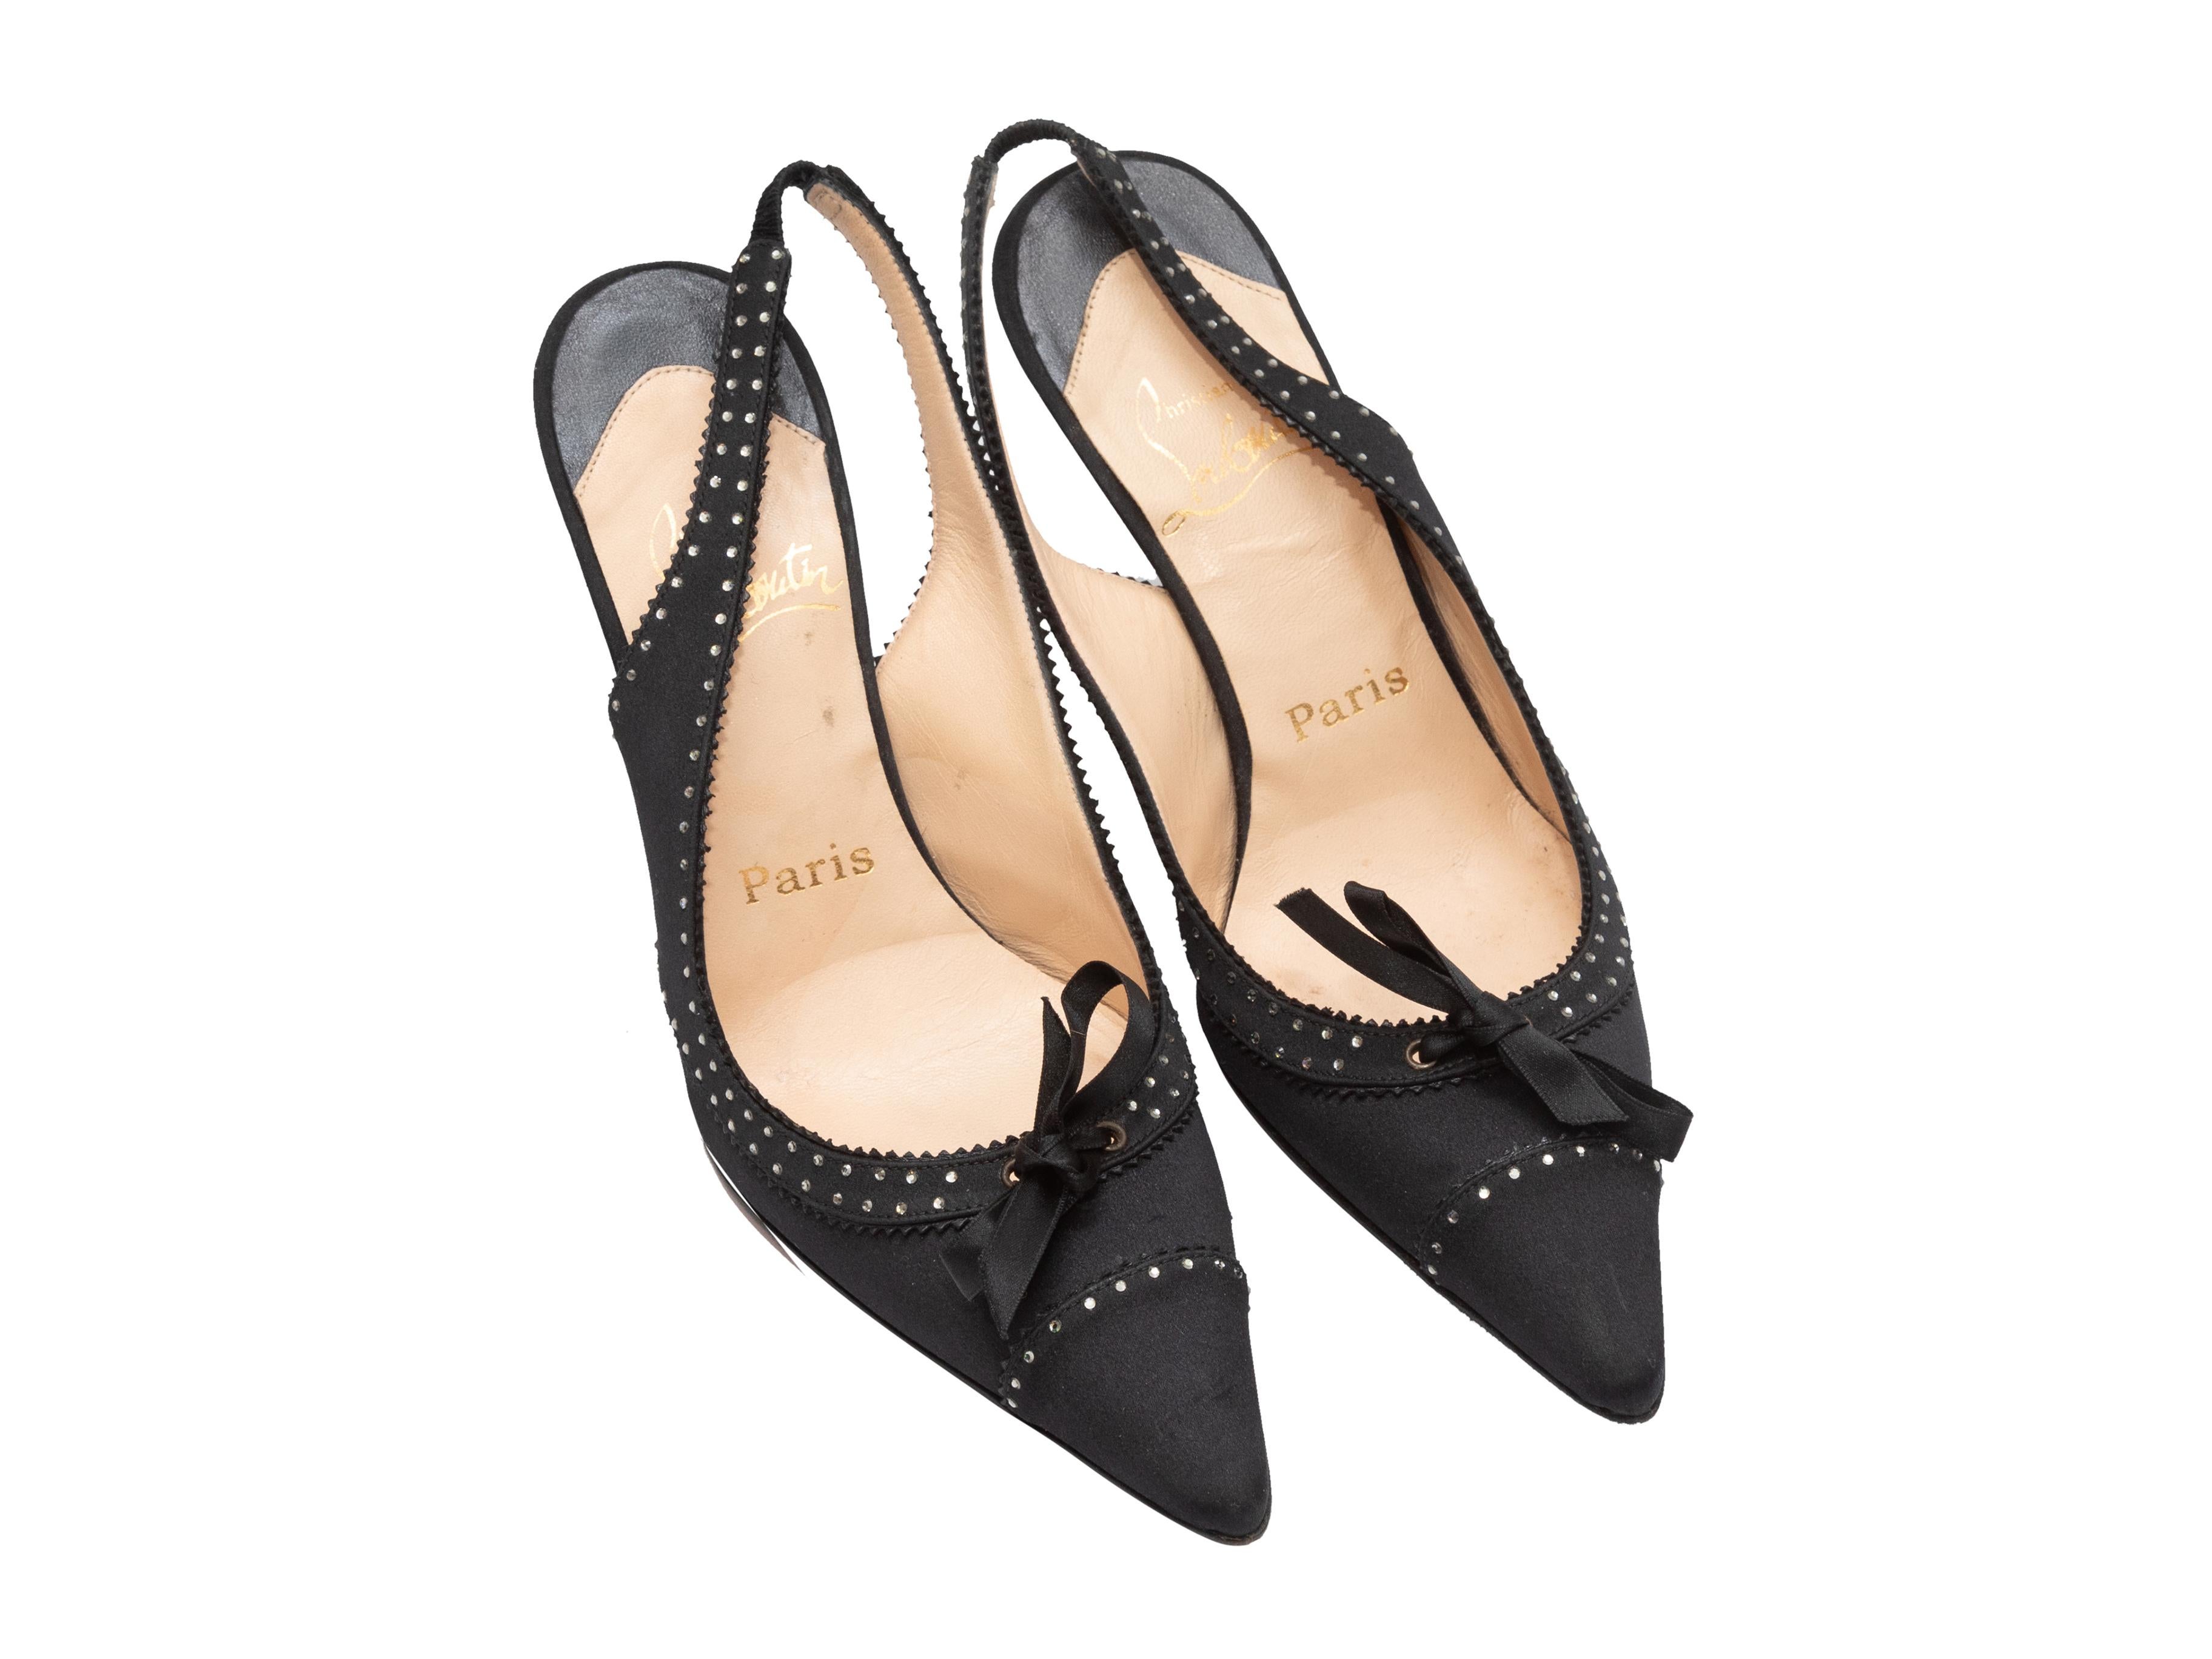 Product Details: Black satin pointed-toe slingbacks by Christian Louboutin. Rhinestone trim throughout. Bow accents at toes. 3.5